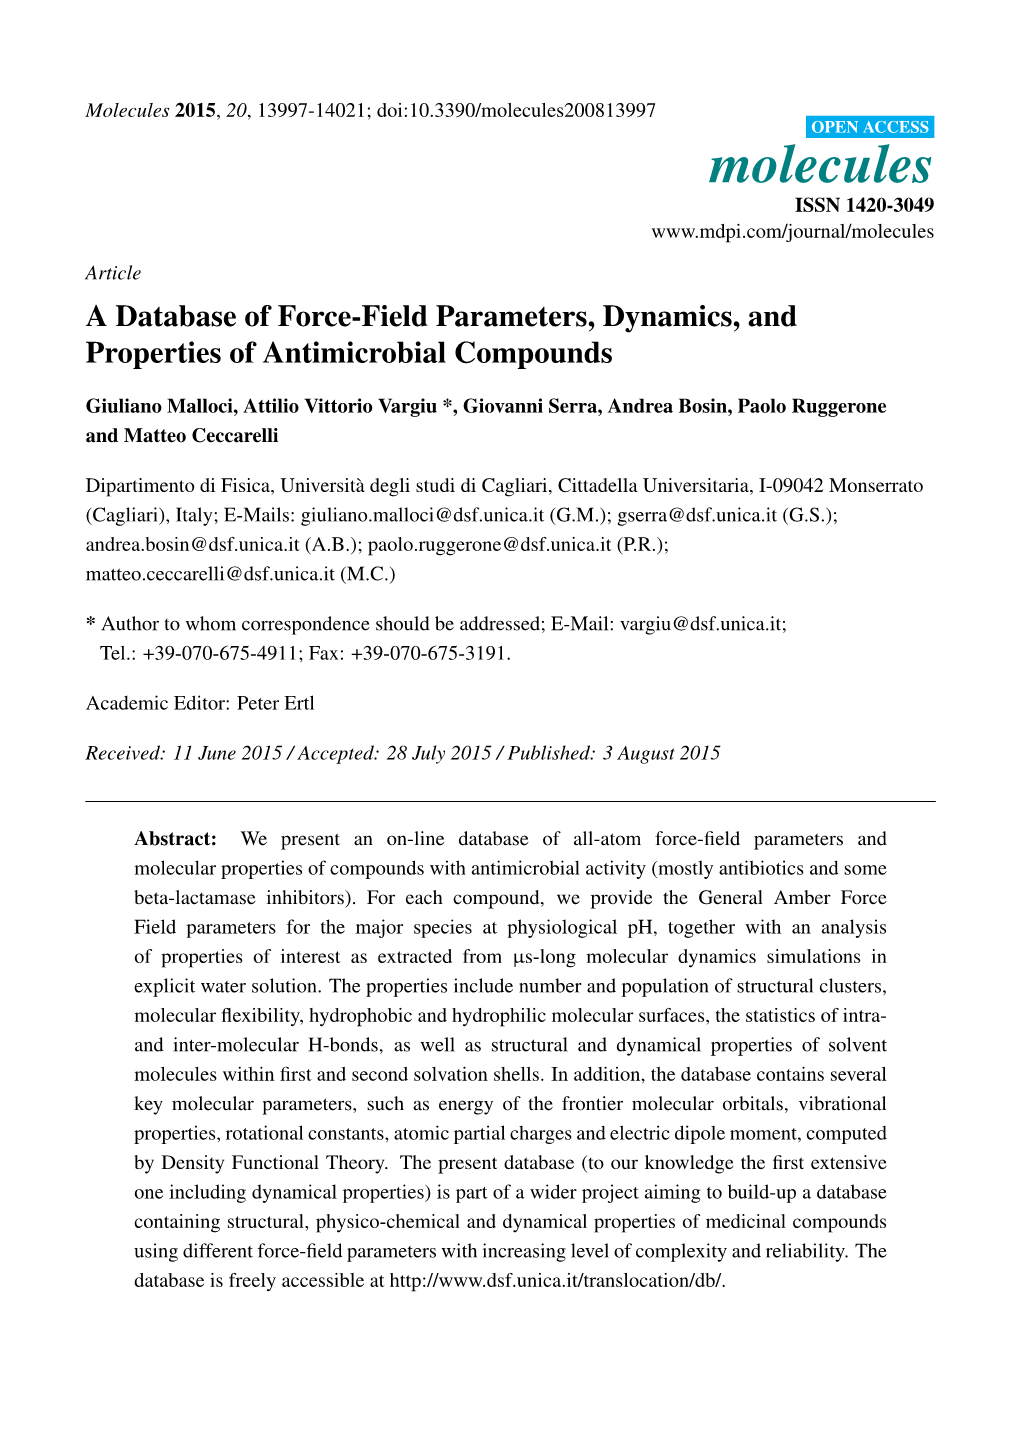 A Database of Force-Field Parameters, Dynamics, and Properties of Antimicrobial Compounds